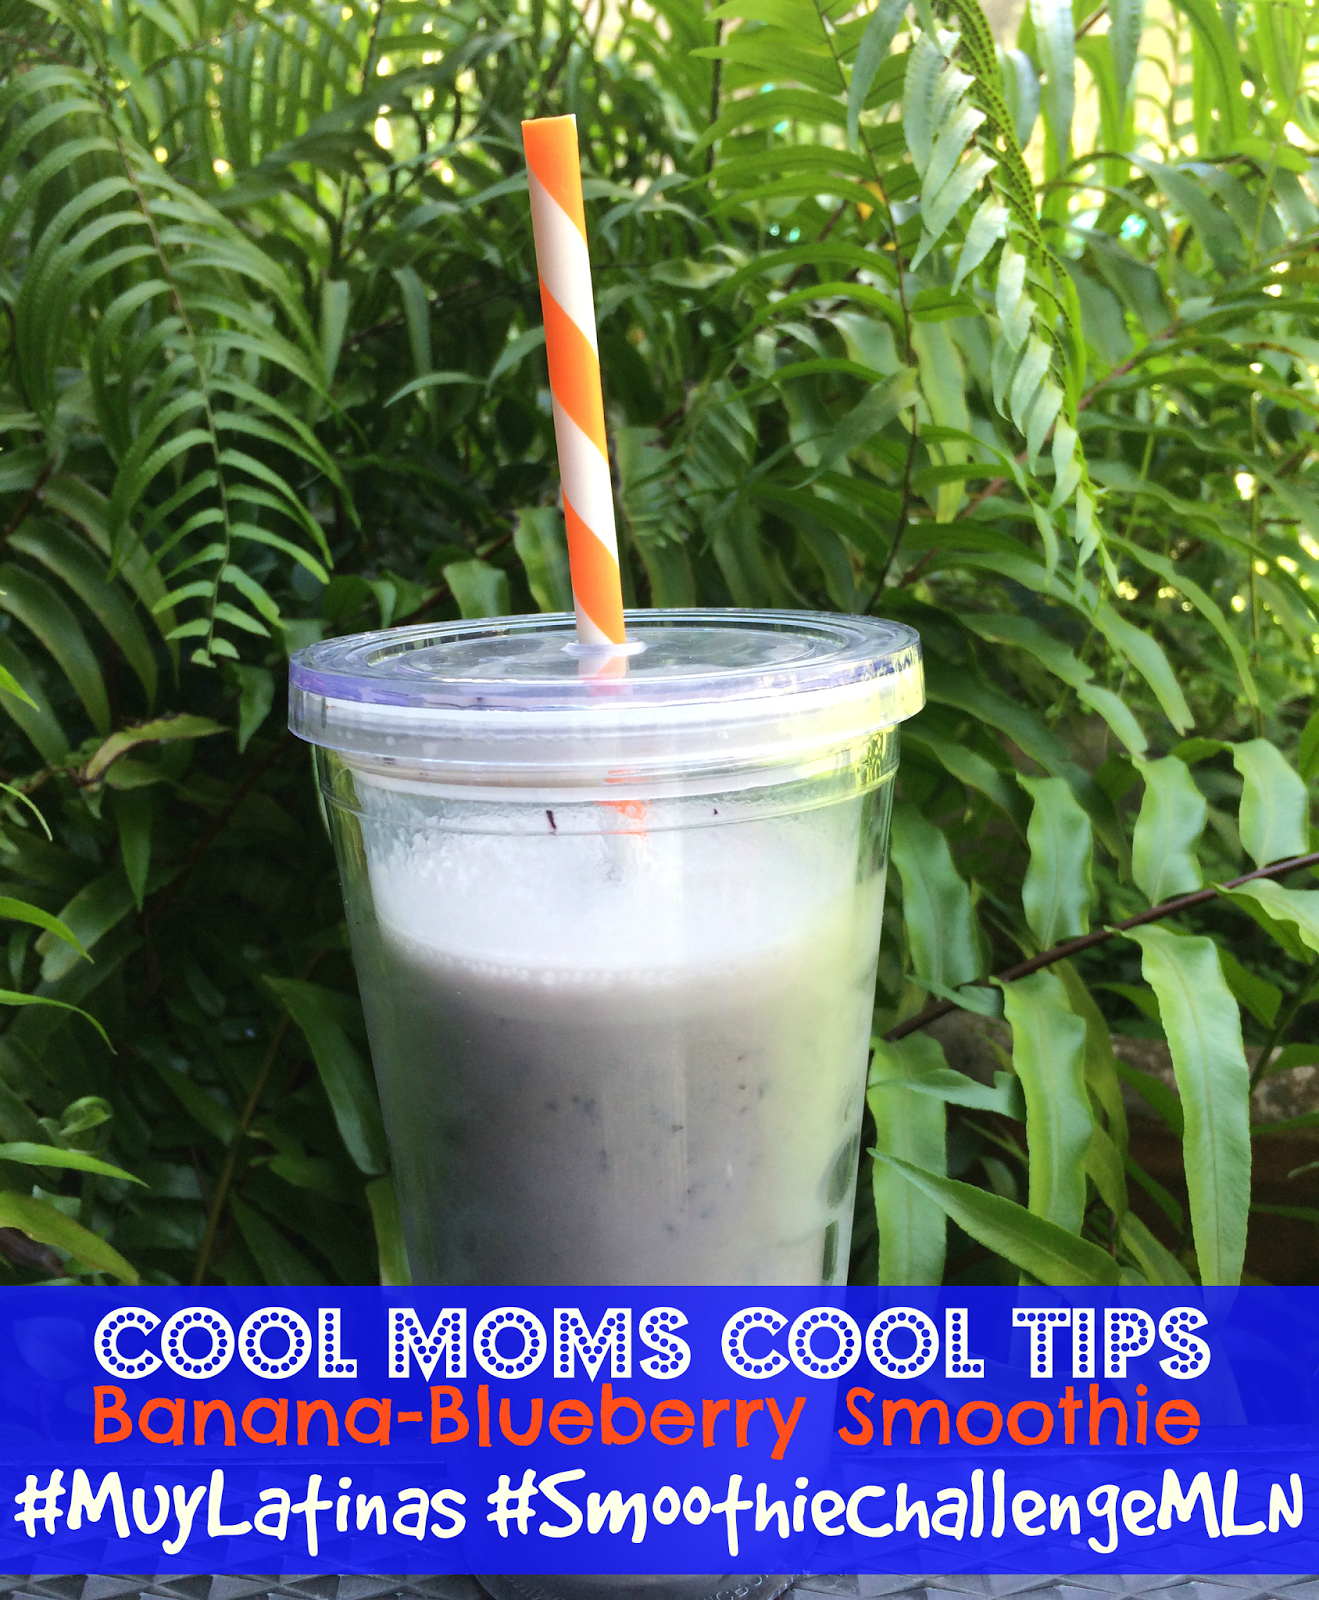 cool moms cool tips #smoothiechallengemln banana blueberry smoothi